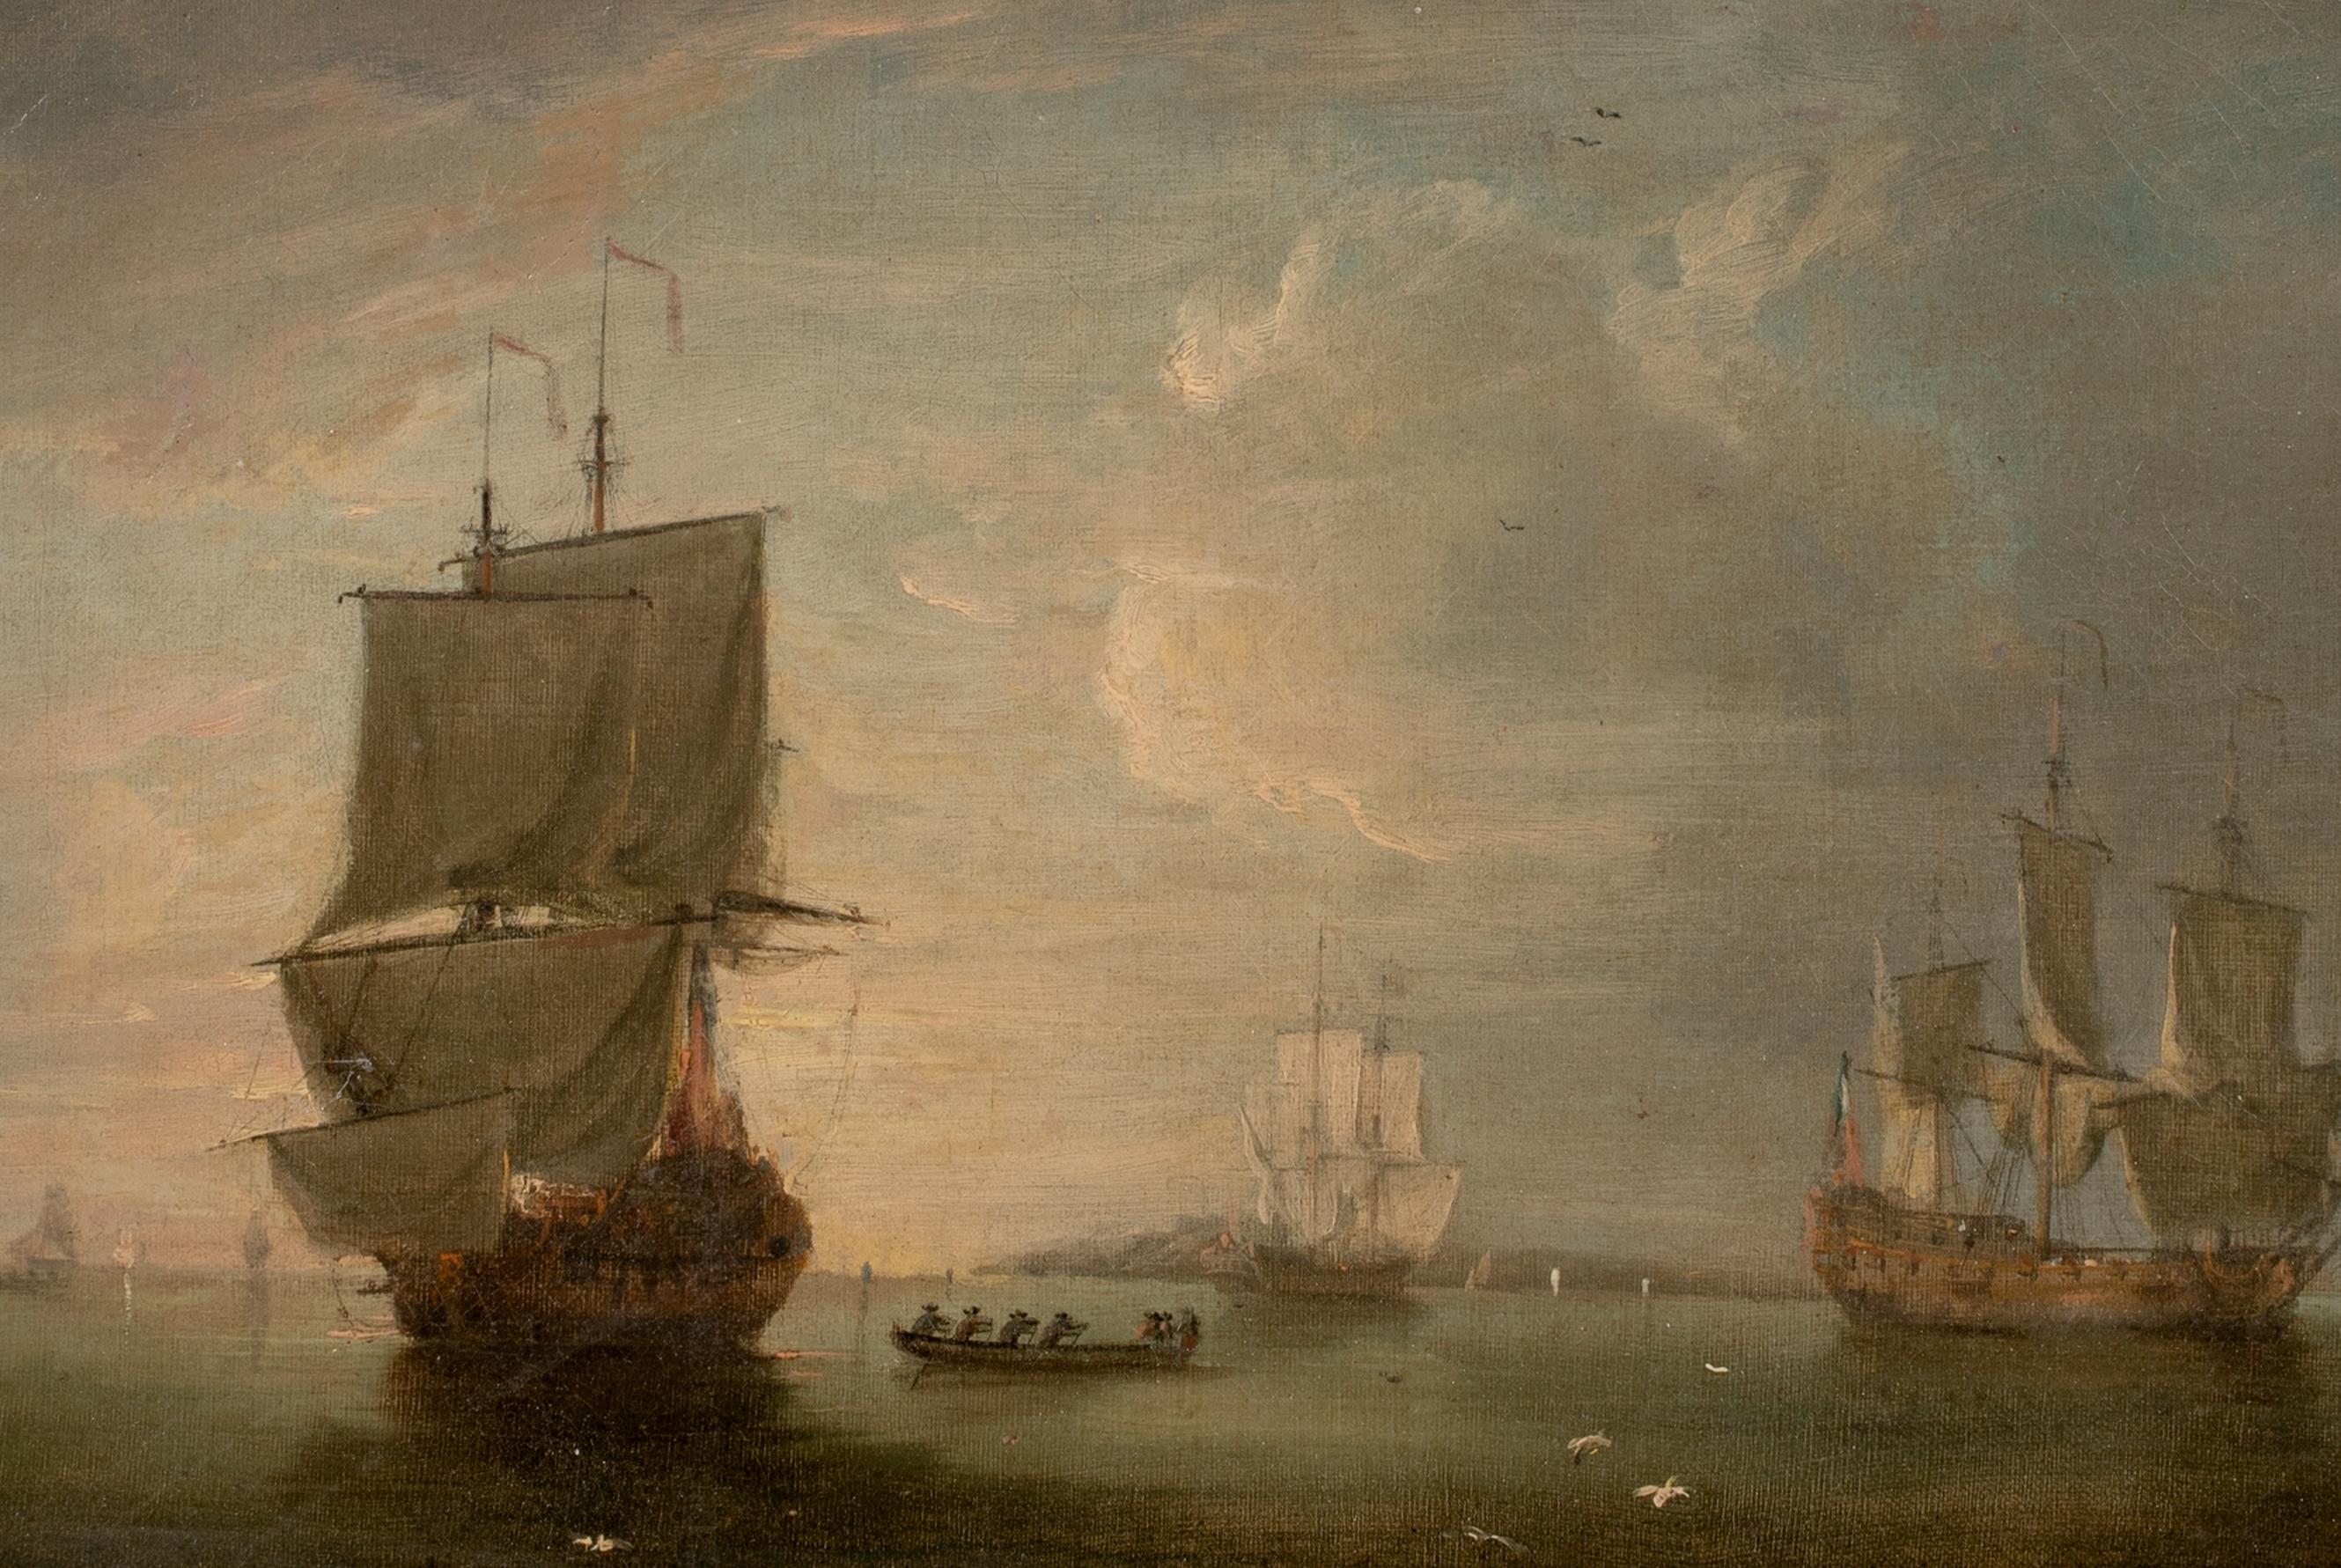 British Royal Navy Fleet Anchored Off The Coast At Sunset, 17th Century  - Brown Landscape Painting by Wilhelm van de Velde the Younger